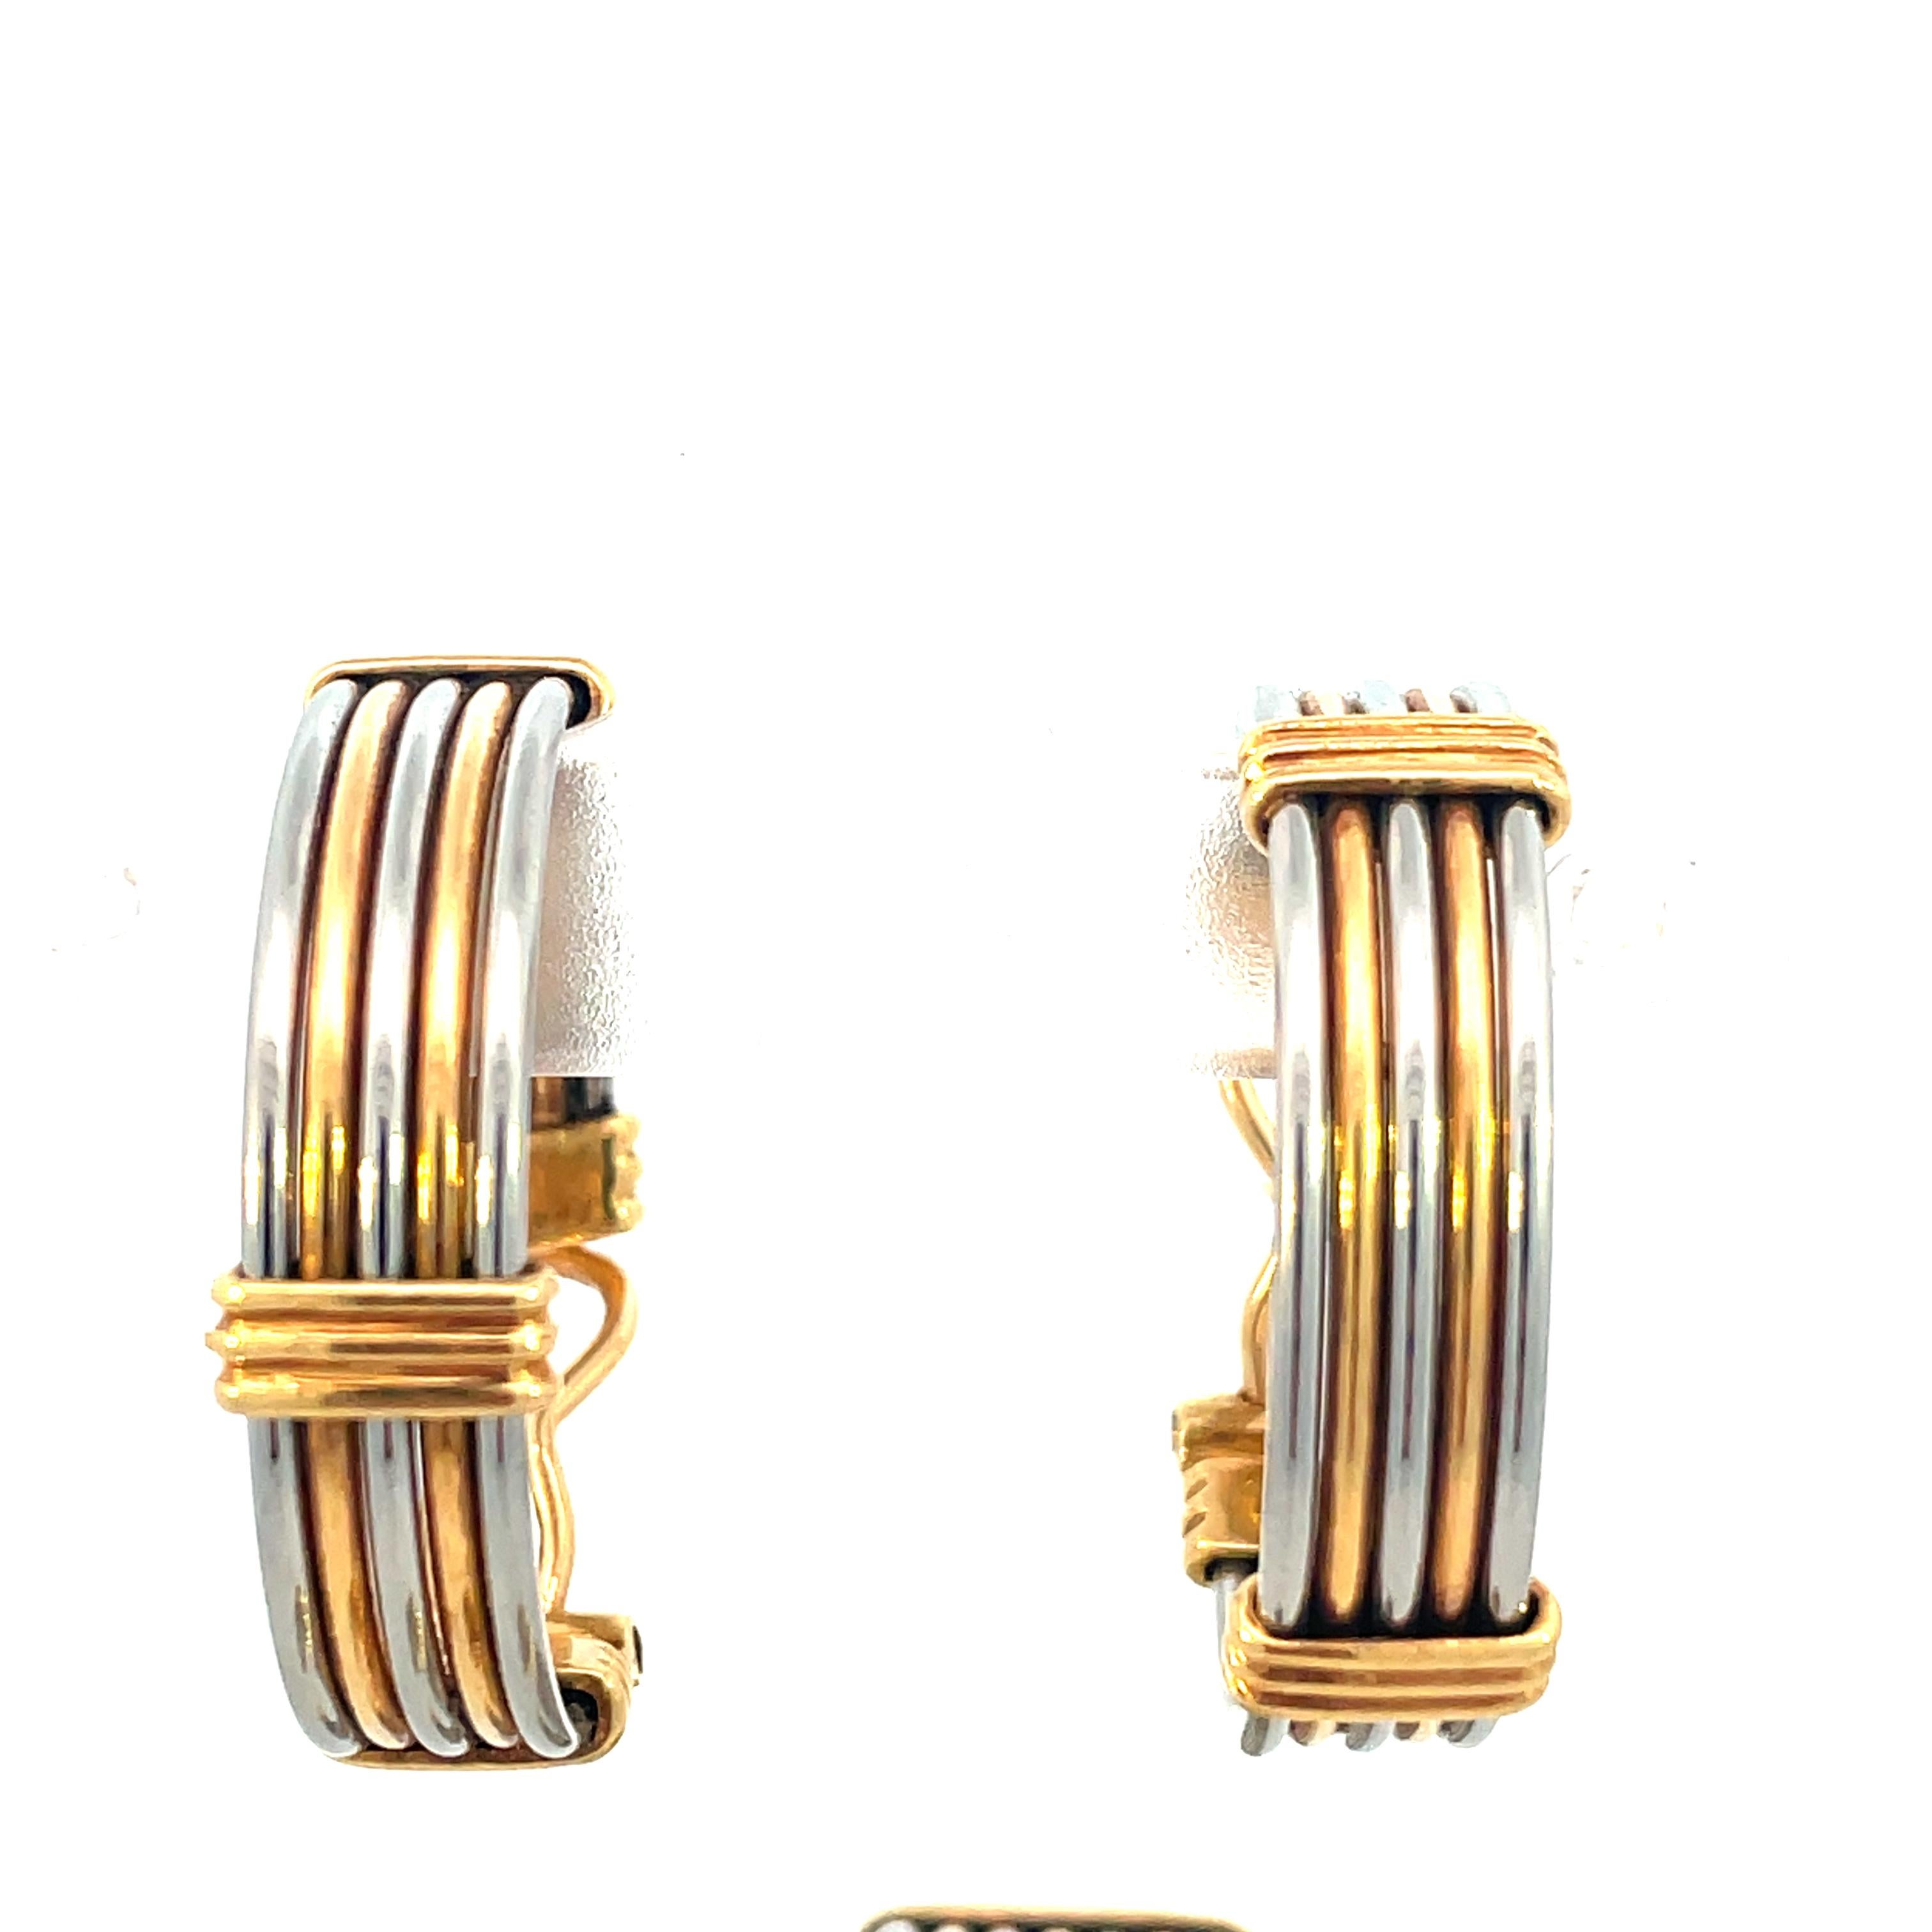 Embrace timeless elegance with this exquisite vintage steel and gold jewelry set from Cartier. Crafted with precision and attention to detail, these stunning Cartier earrings and bracelet exude a sense of sophistication and charm that transcends